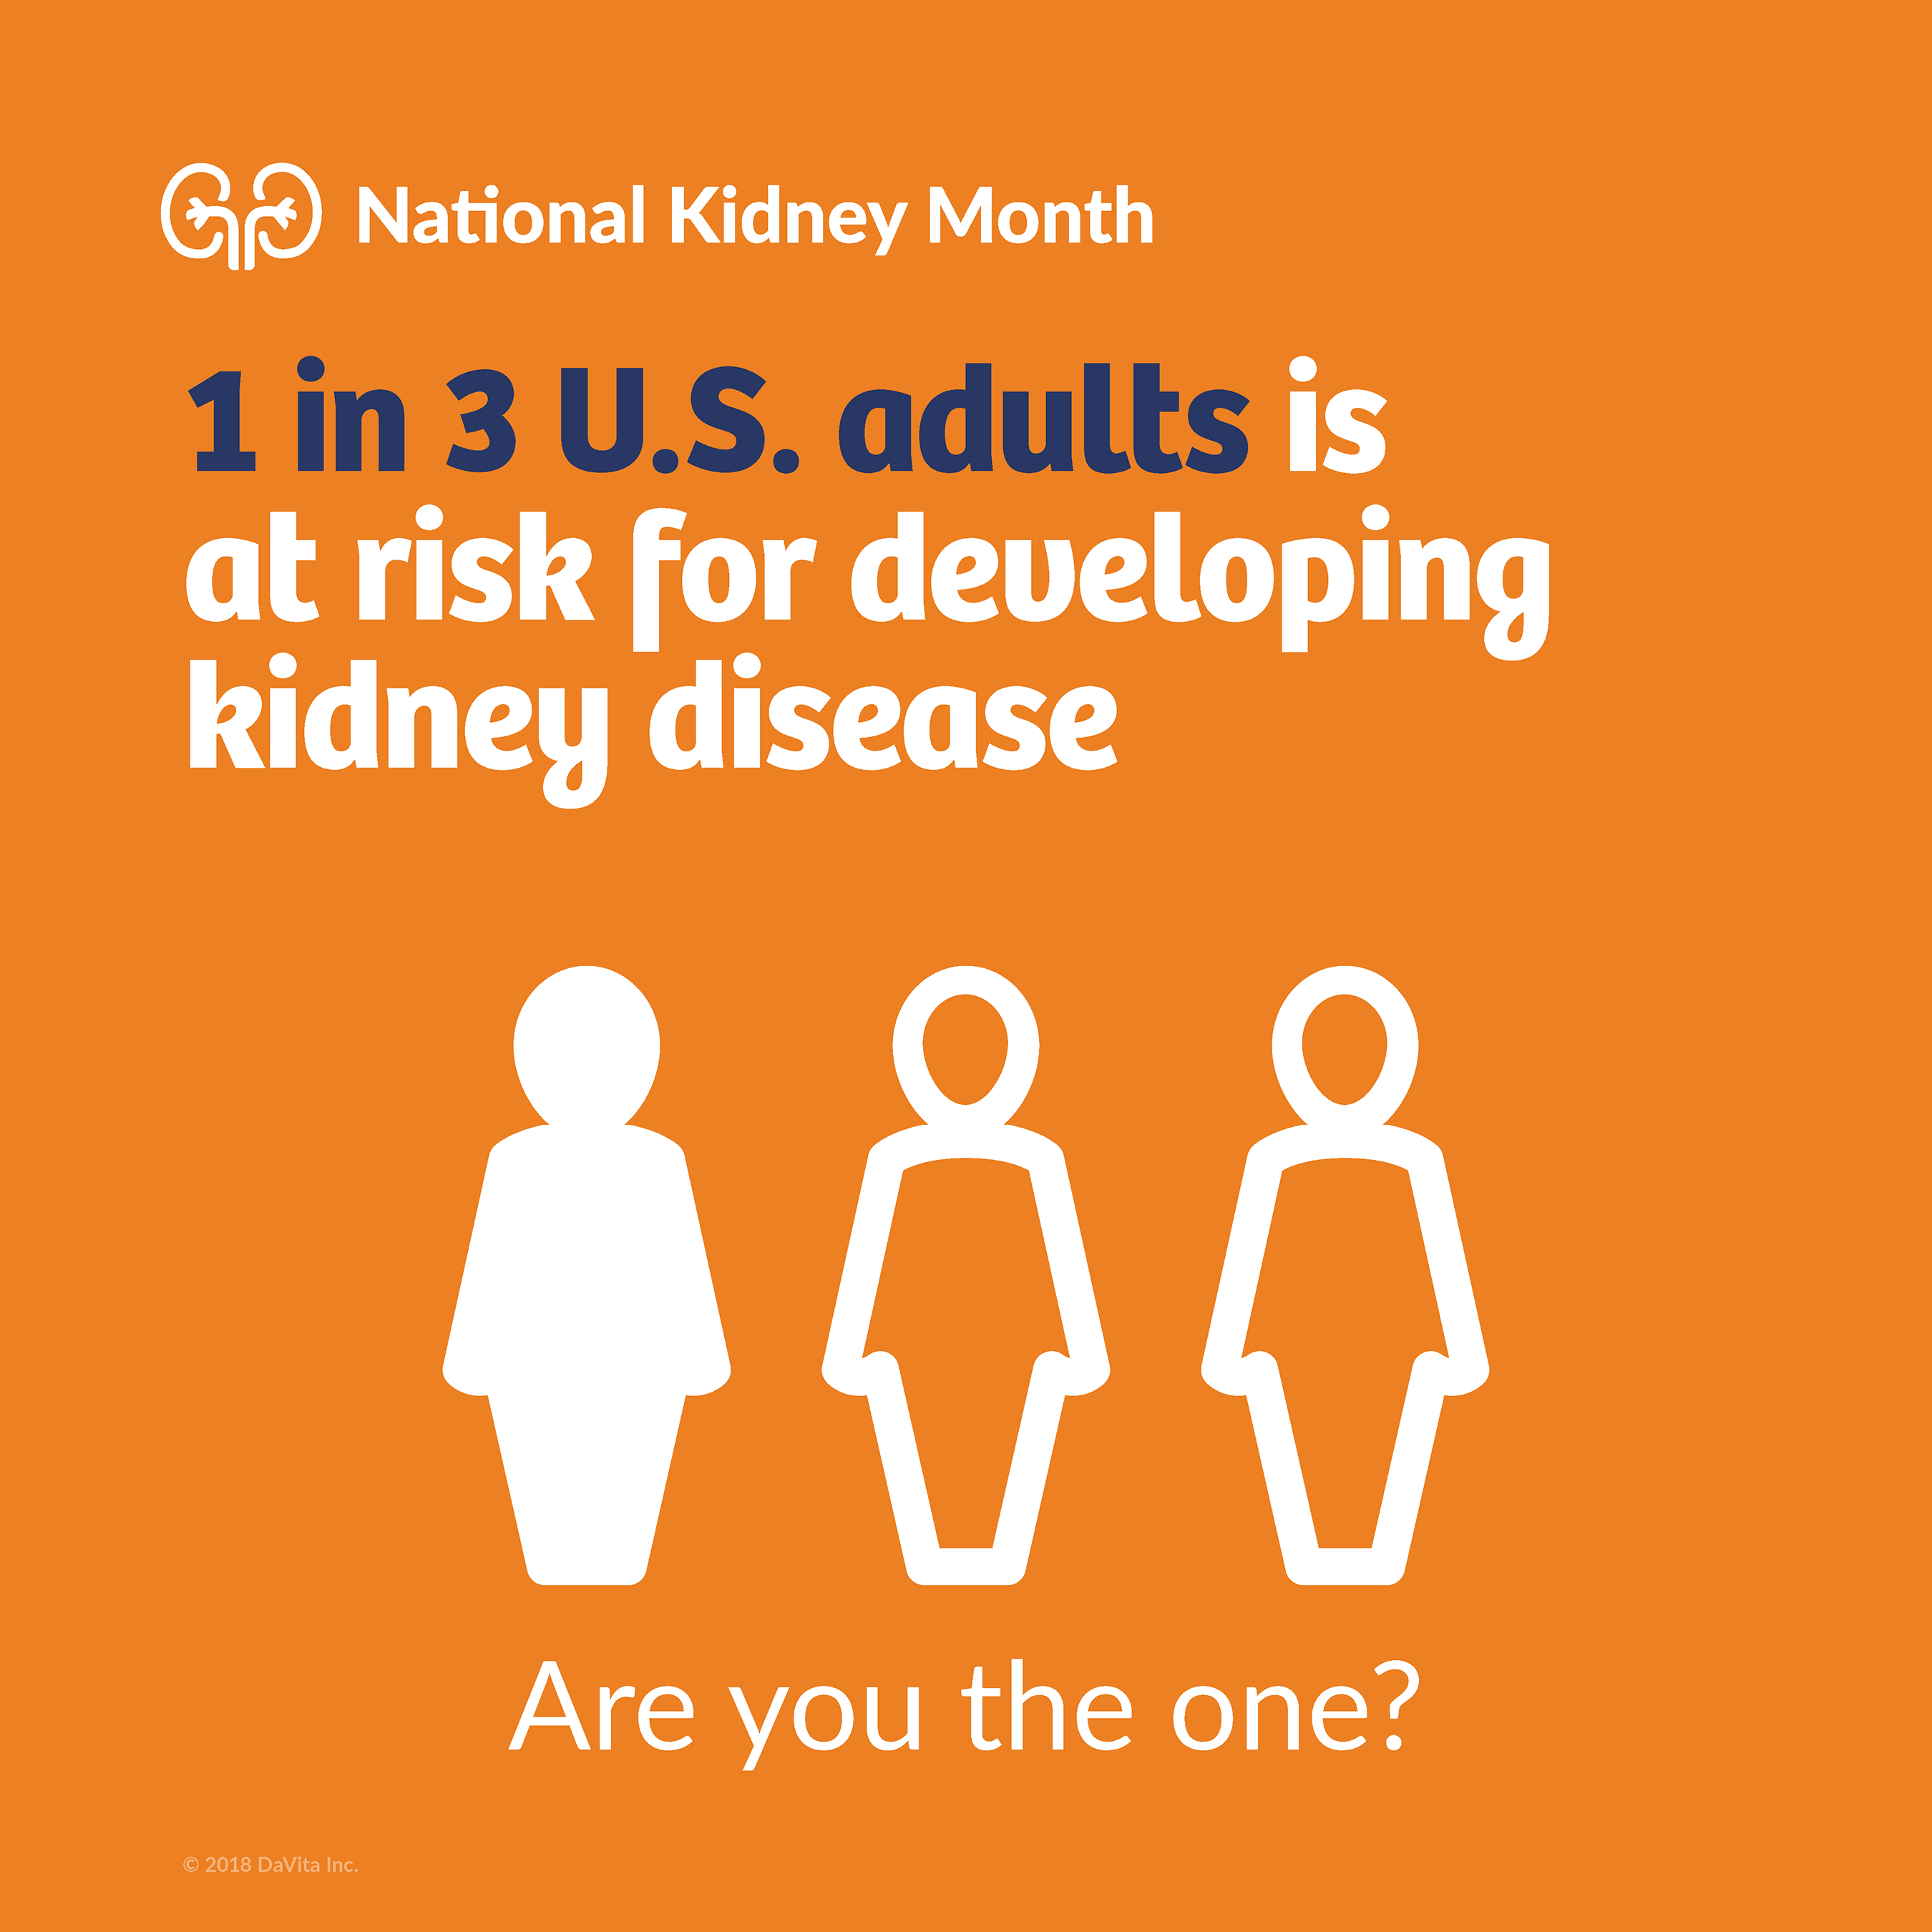 1 in 3 U.S. adults is at risk for developing kidney disease